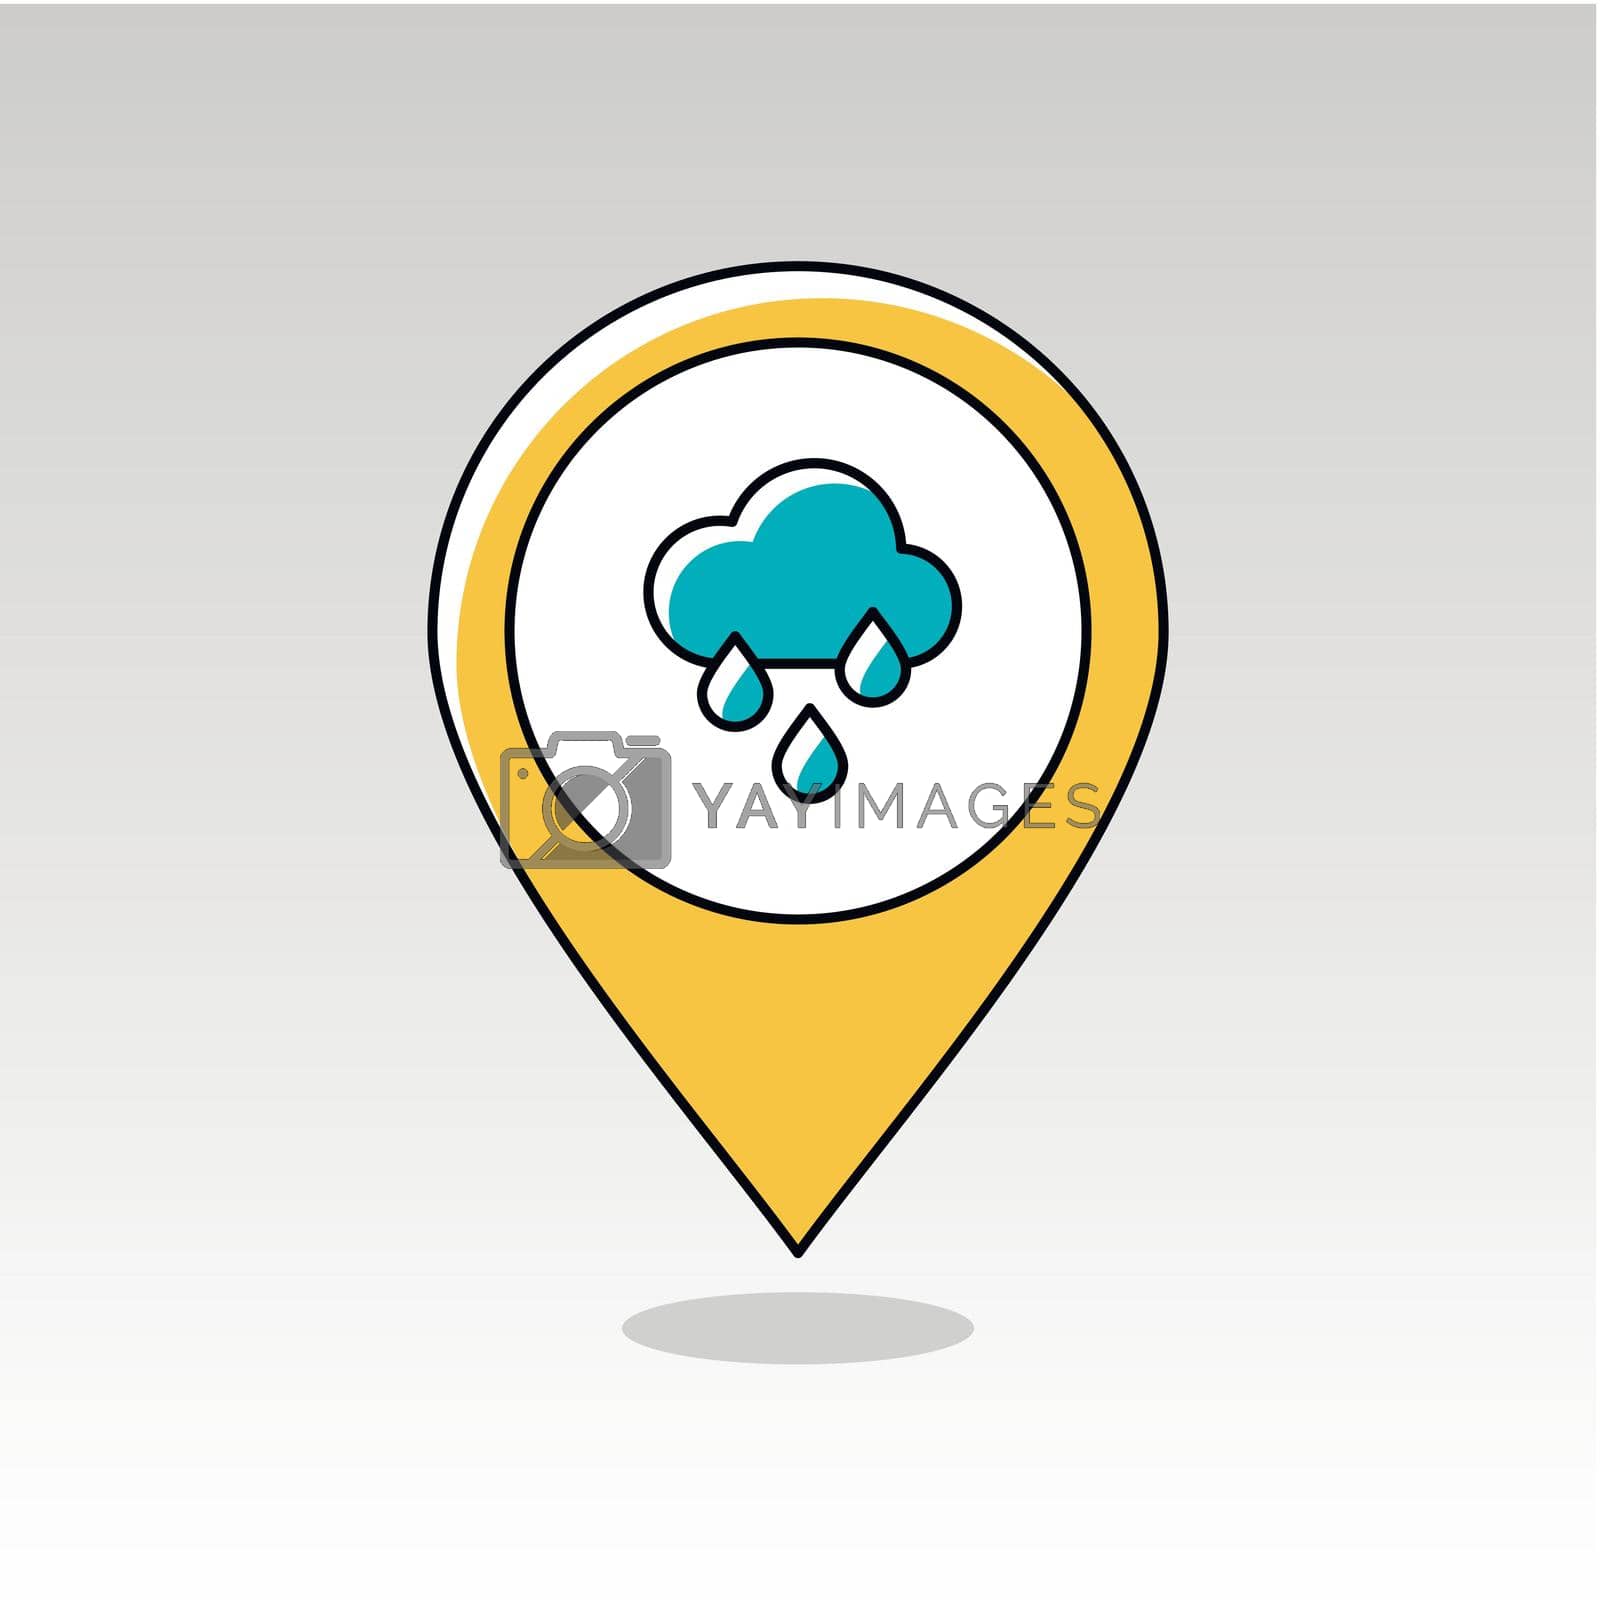 Rain Cloud Rainfall outline pin map icon. Map pointer. Map markers. Meteorology. Weather. Vector illustration eps 10